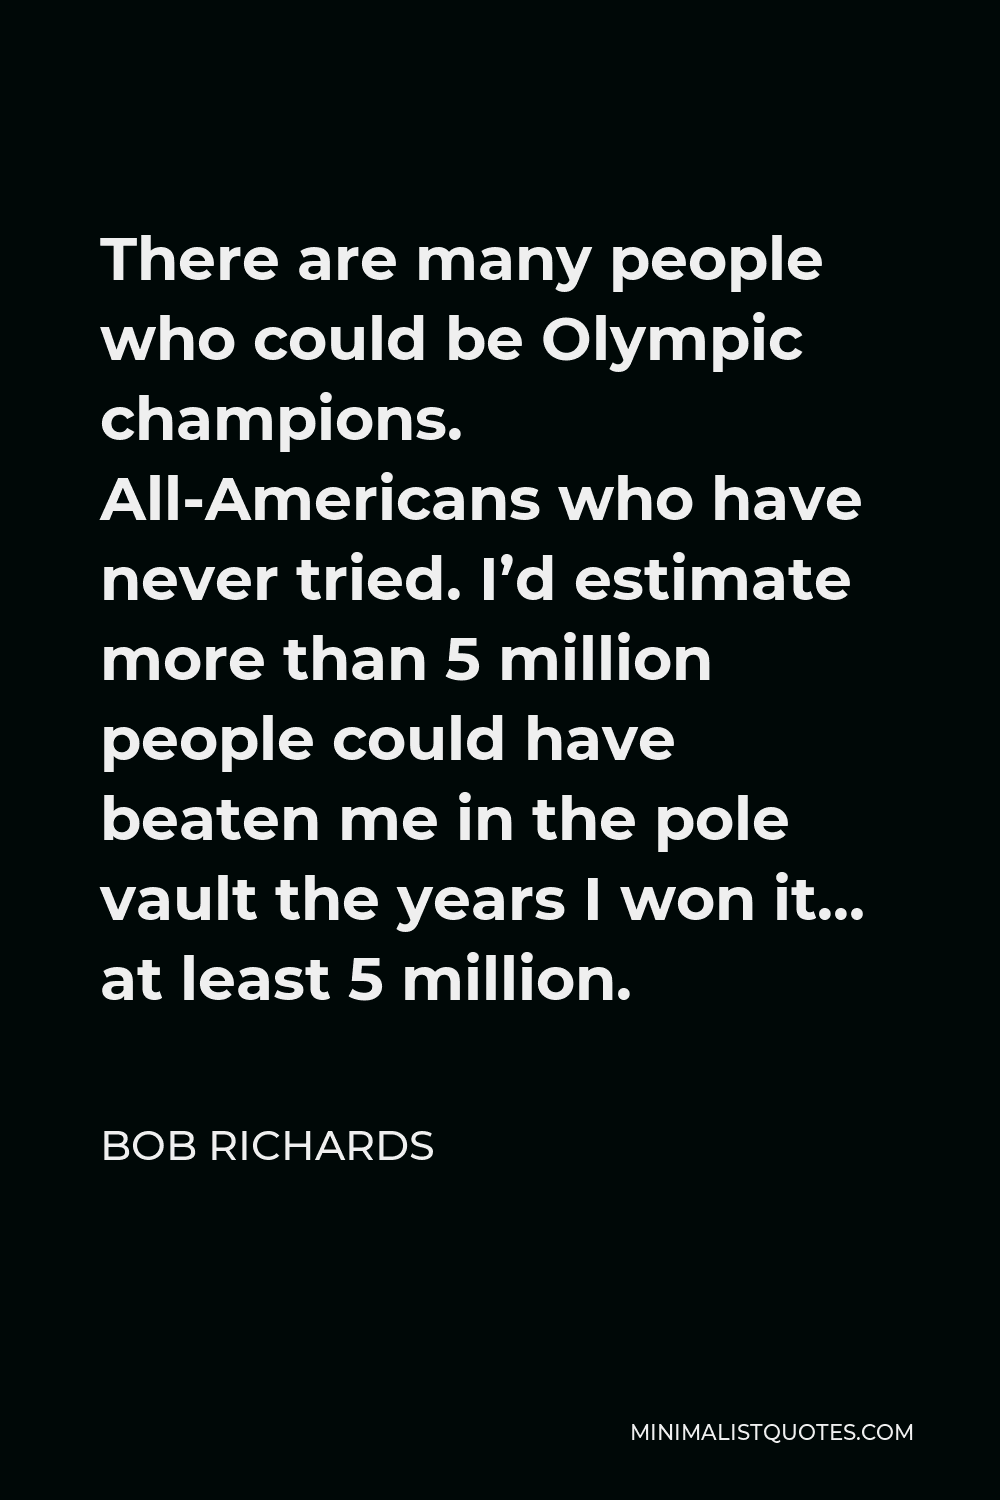 Bob Richards Quote - There are many people who could be Olympic champions. All-Americans who have never tried. I’d estimate more than 5 million people could have beaten me in the pole vault the years I won it… at least 5 million.